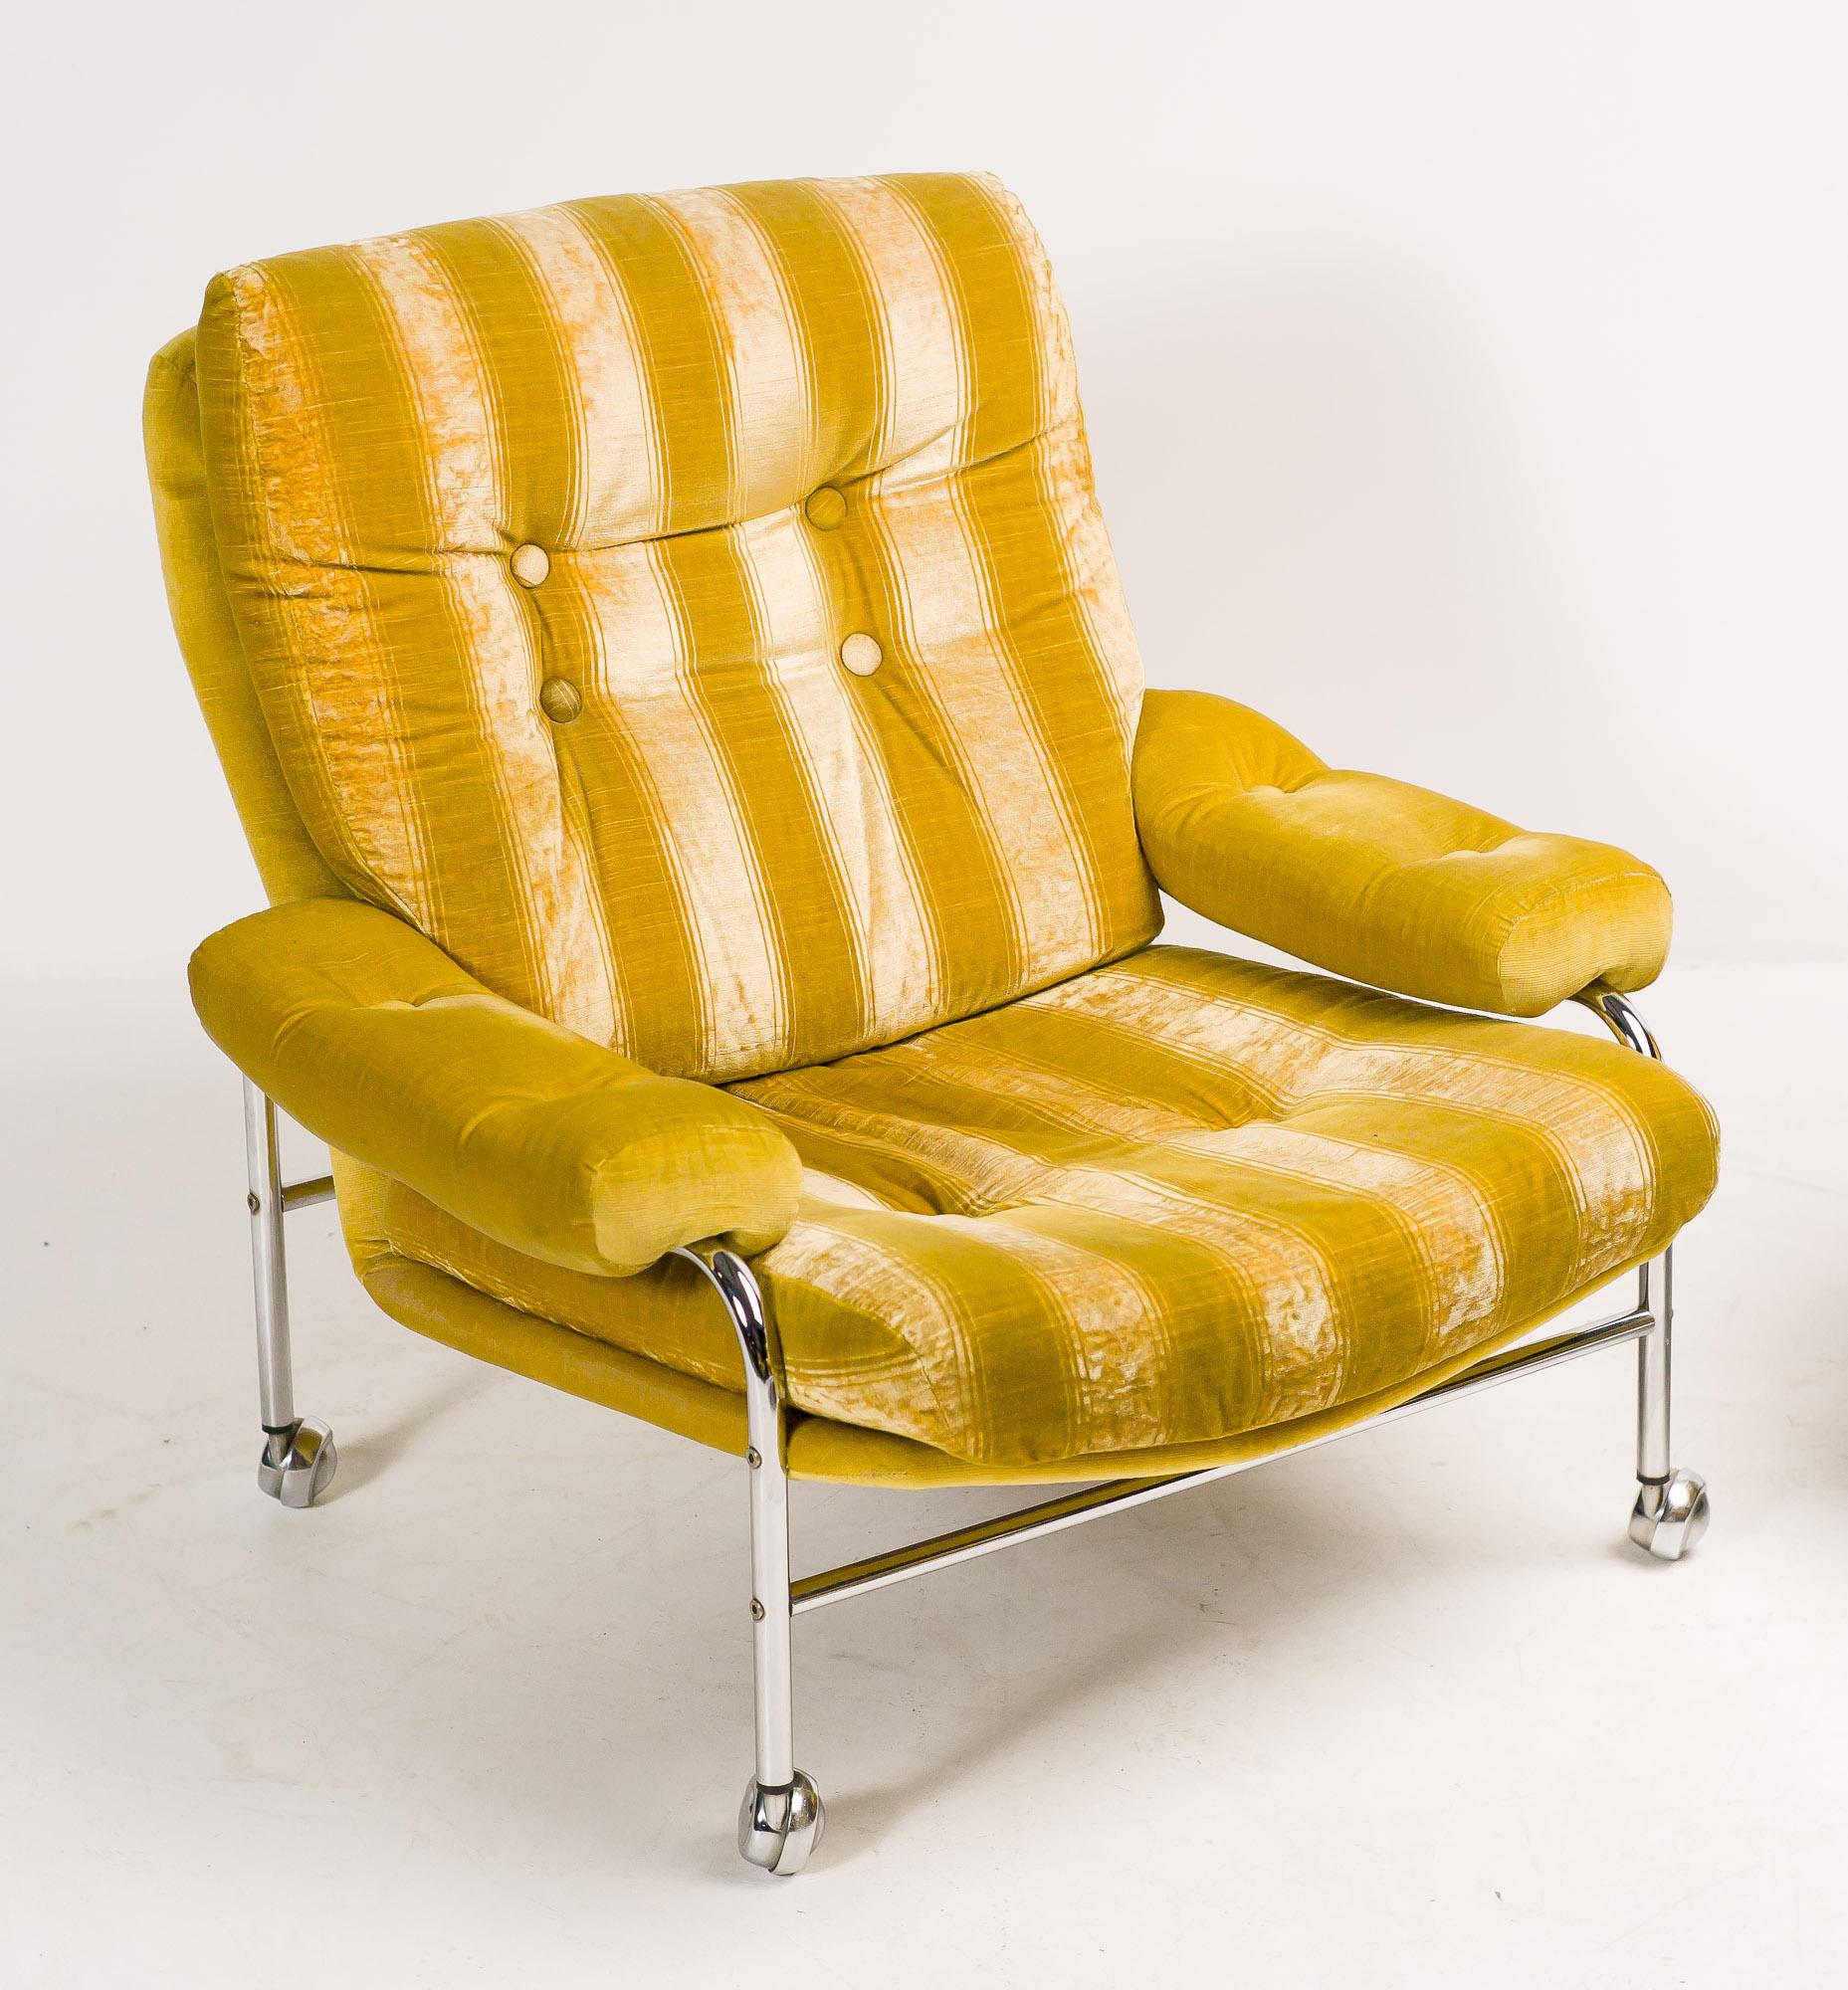 Spectacular set of four Karin chairs in great vintage 1960s condition with the original two-tone velvet upholstery.
Free of any odours or stains, just some slight wear to the fabric on some of the buttons.